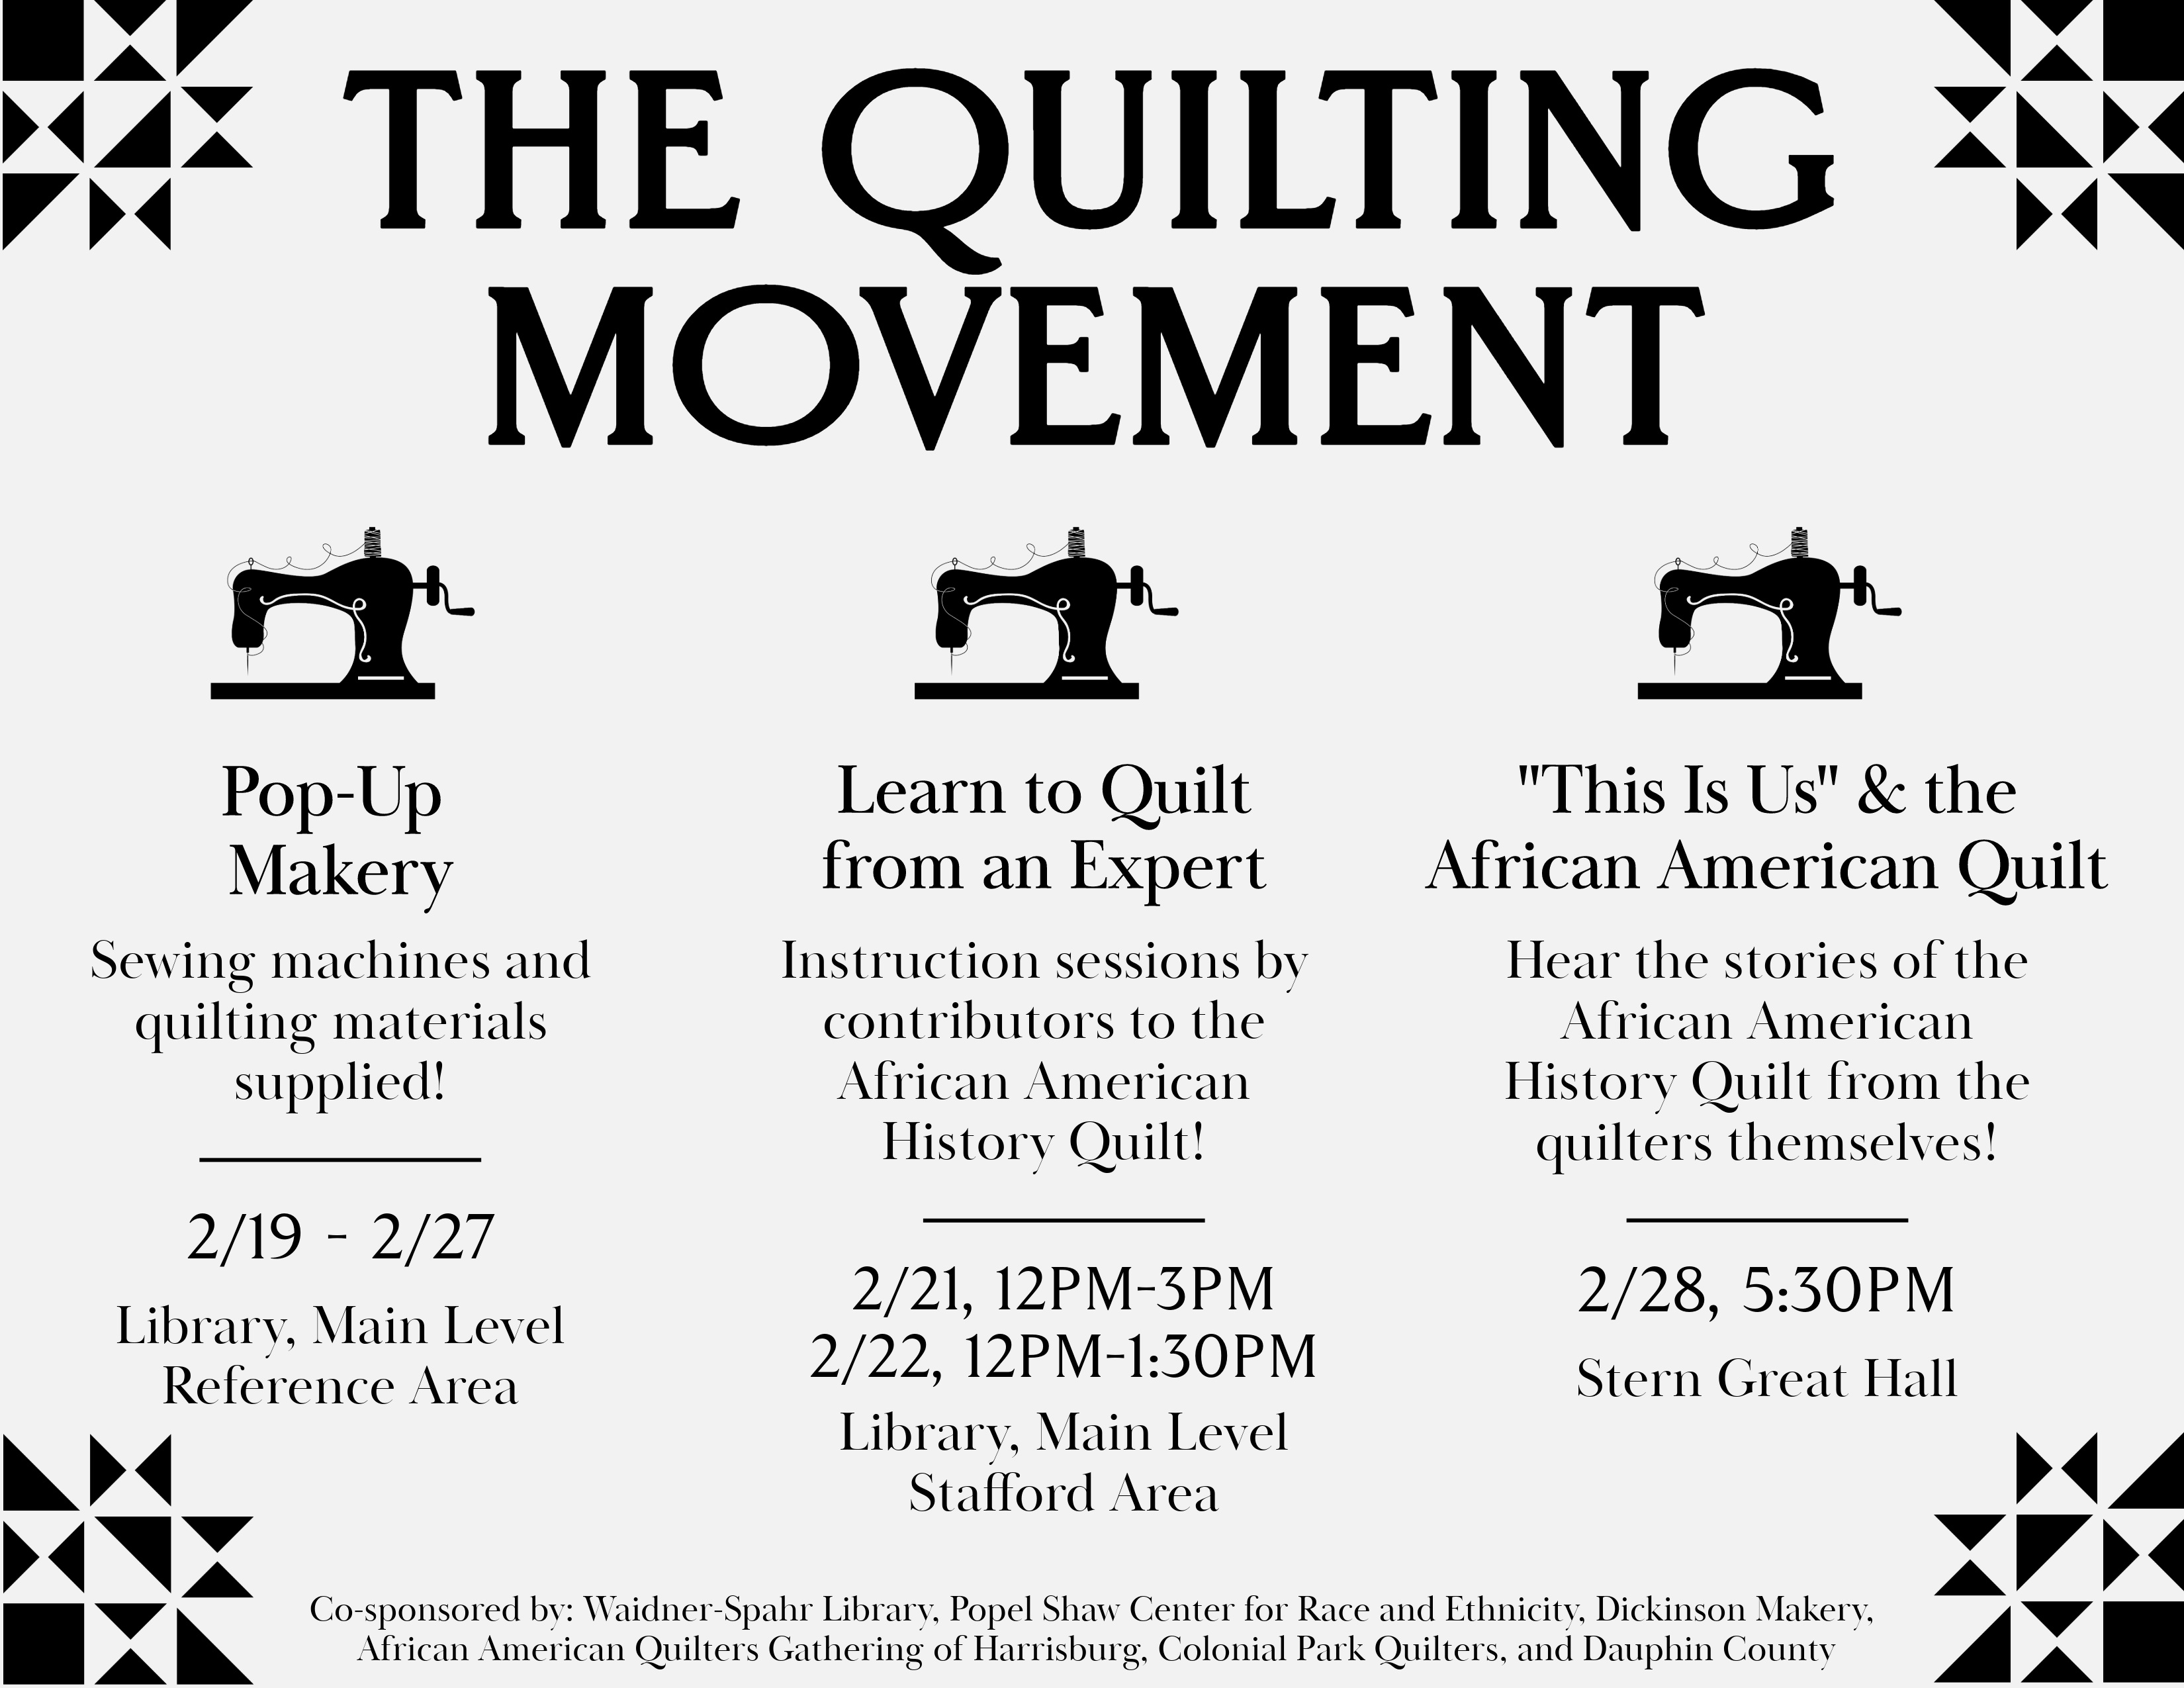 Pop-Up Makery 2/19-2/27 Main level of LibraryLearn to Quilt from expert 2/21 12PM - 3PM 2/22 12 PM-1:30 PM Library main level, Stafford Area Learn about the African American Quilt and history fro the quilters themselves 2/28 5:30 Stern Great Hall 